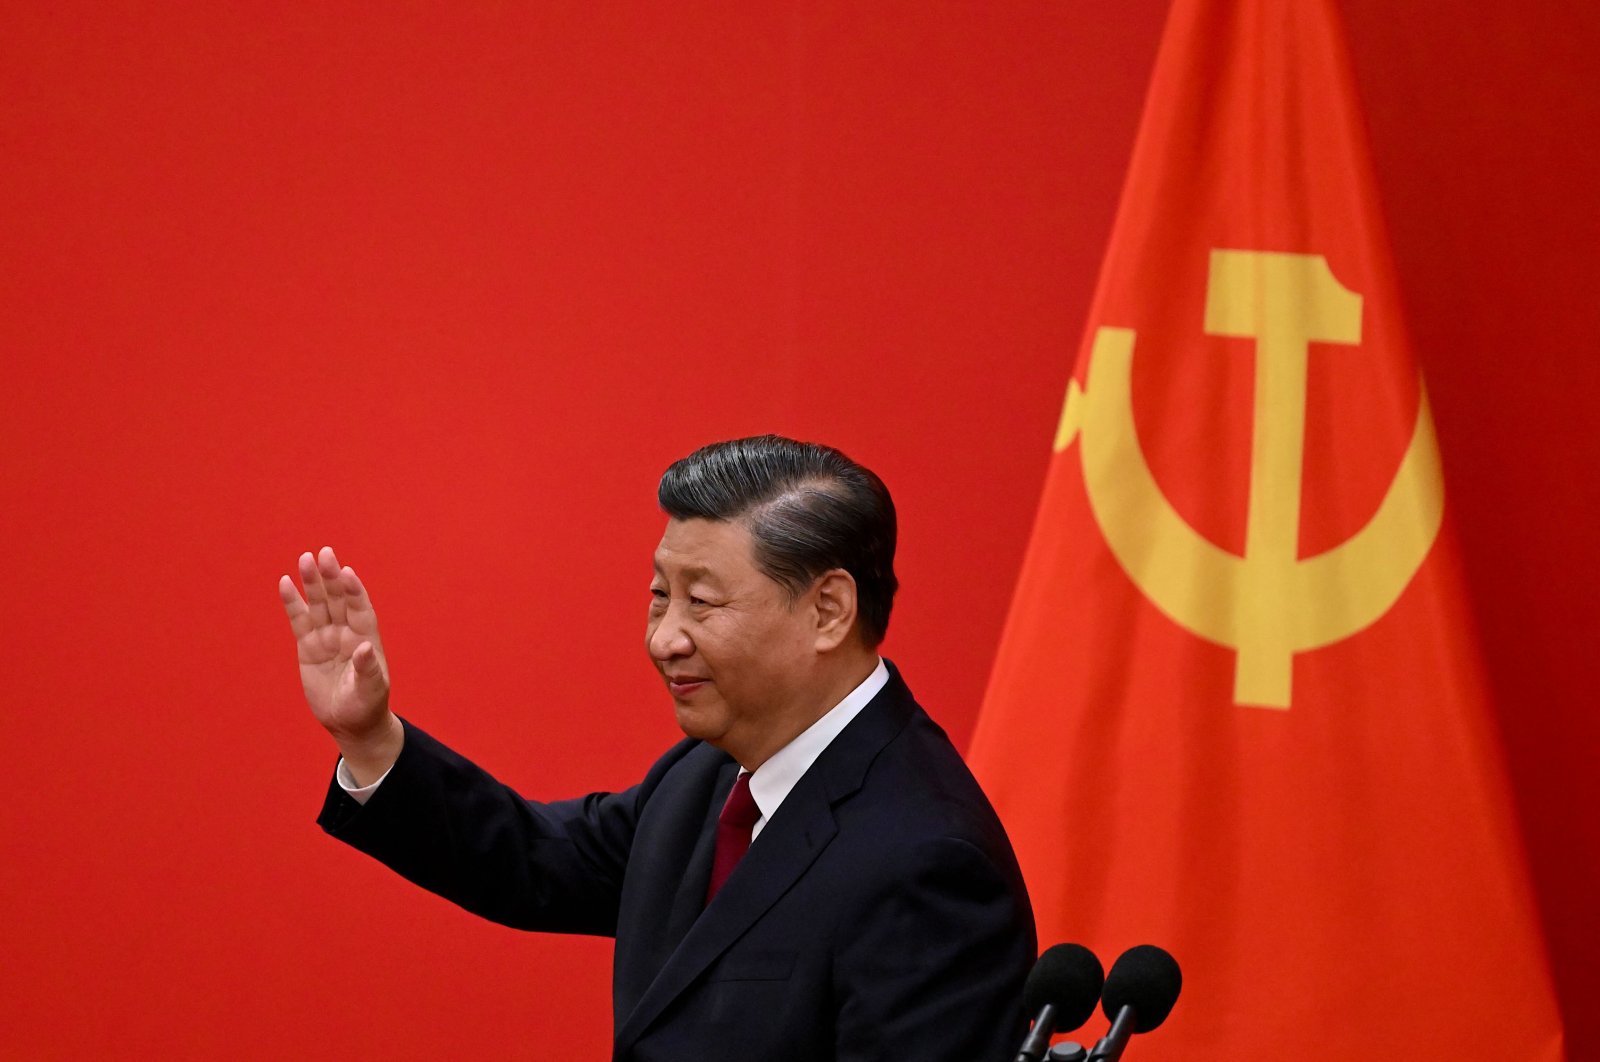 China&#039;s President Xi Jinping waves after introducing the members of the Chinese Communist Party&#039;s new Politburo Standing Committee, Beijing, China, Oct. 23, 2022. (AFP Photo)